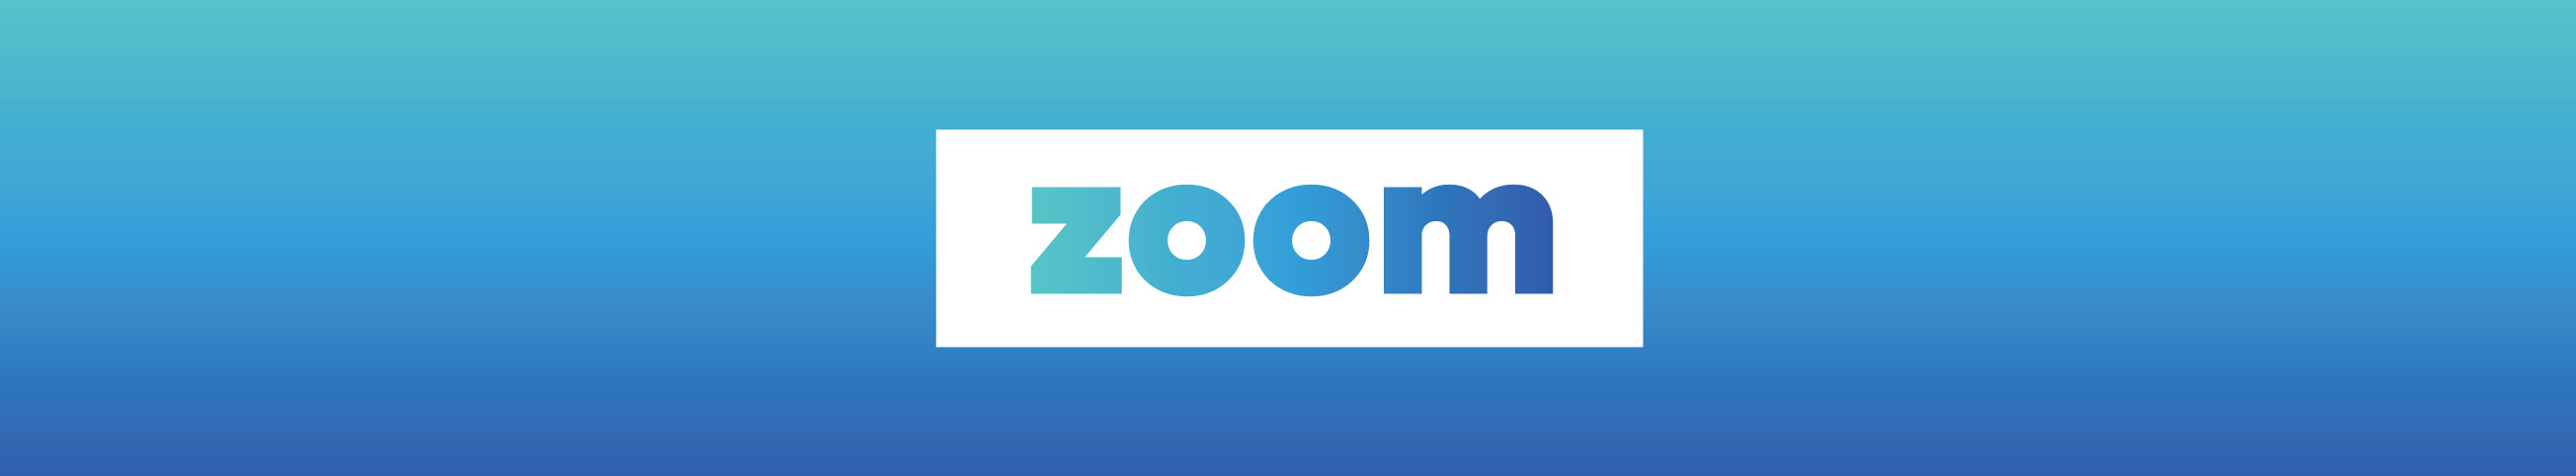 Click here to apply for a zoom16-18 travel pass